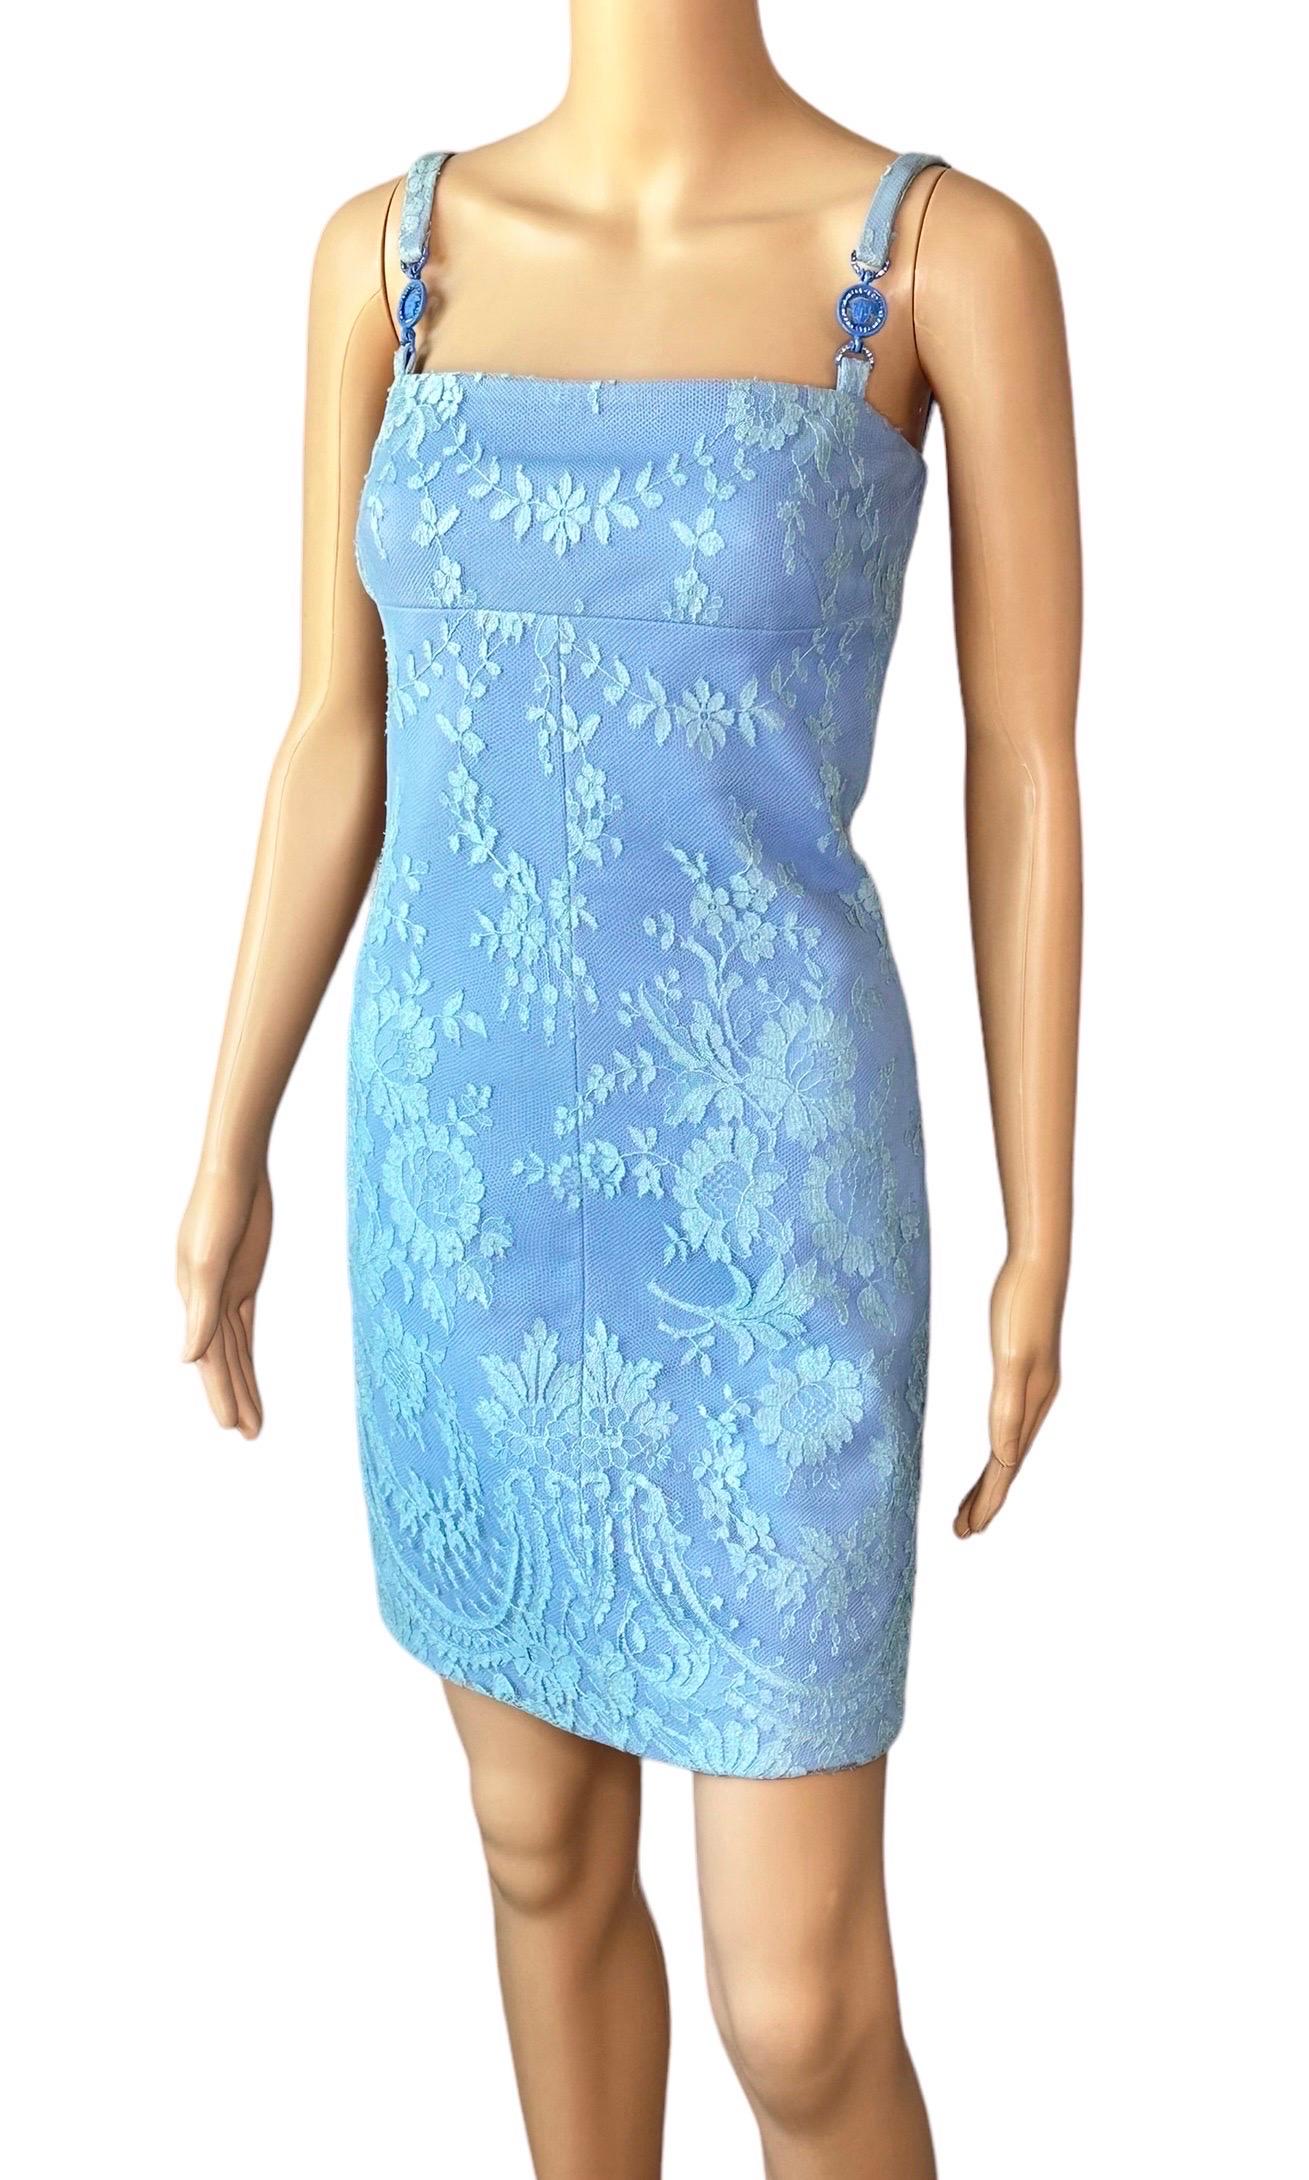 Gianni Versace F/W 1996 Vintage Floral Lace and Leather Blue Mini Dress IT 38

Blue Gianni Versace leather mini dress with lace overlaying the leather featuring embellished medusa straps, square neck and concealed zip closure at back. Please note